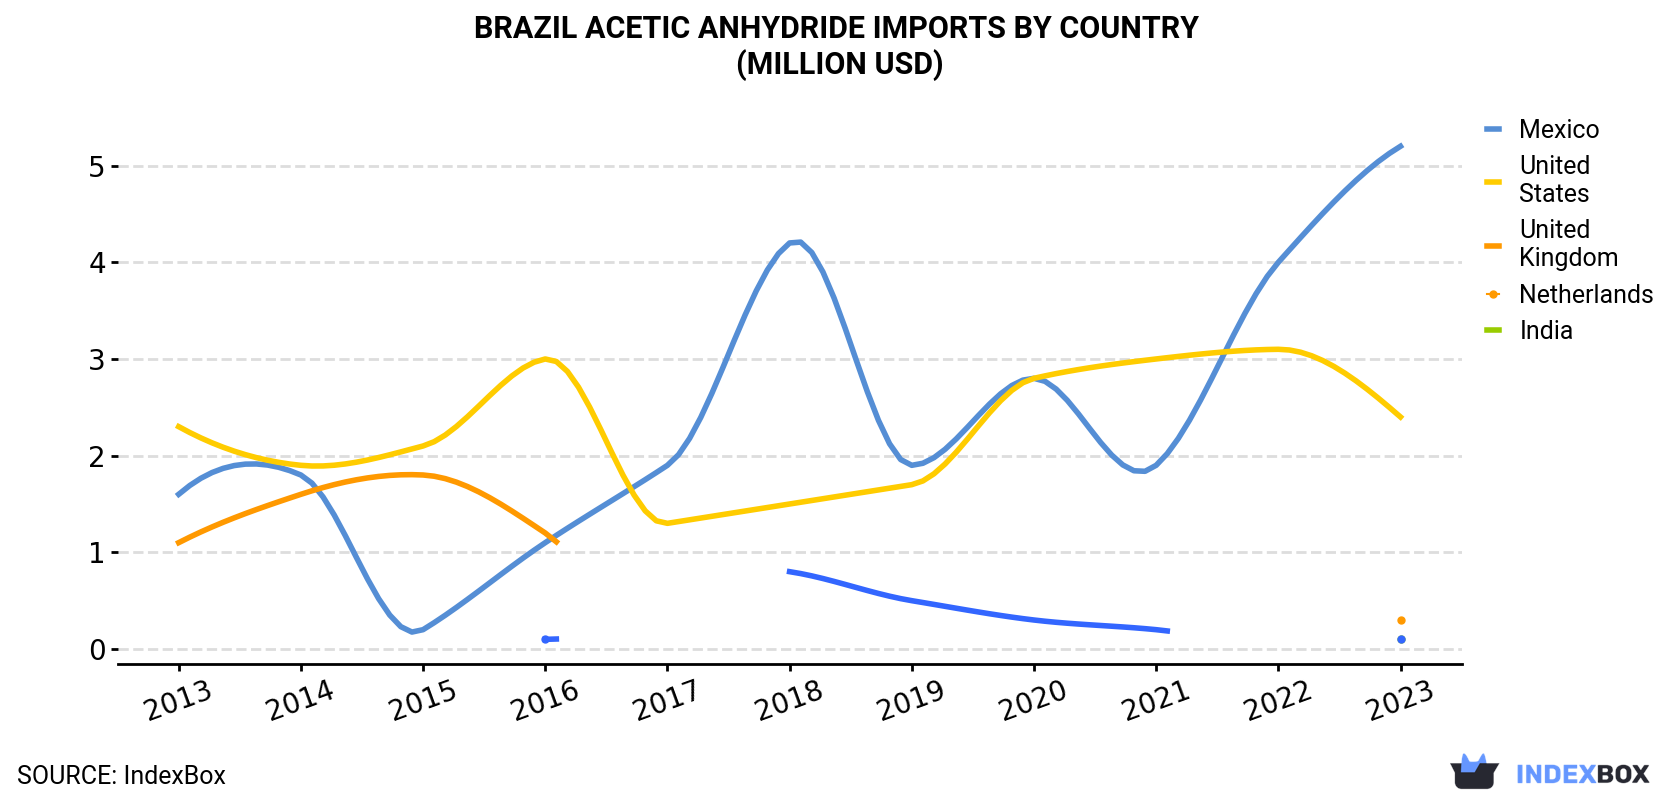 Brazil Acetic Anhydride Imports By Country (Million USD)